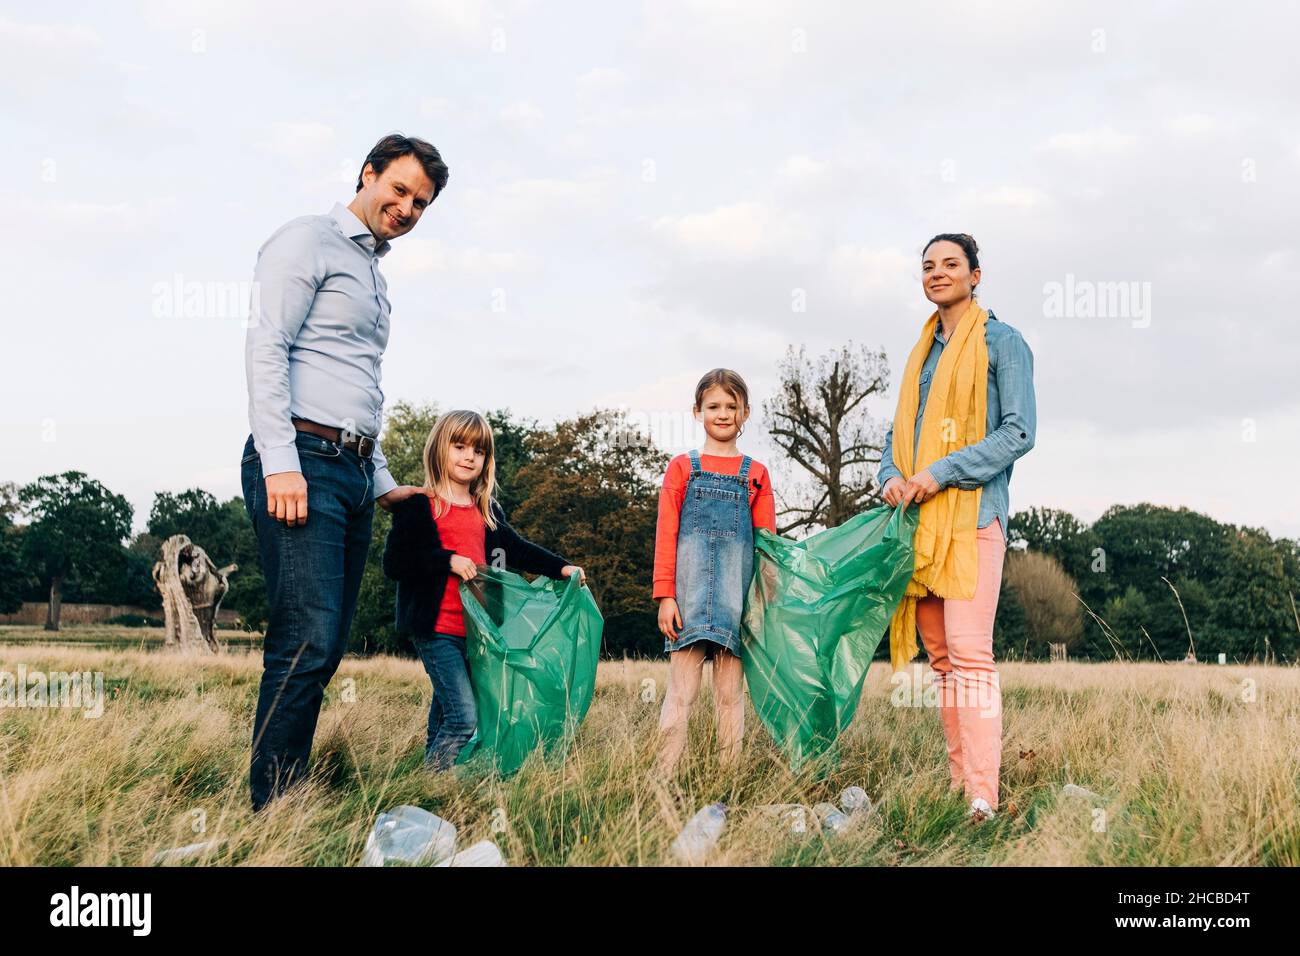 Family with garbage bags doing cleanup in park Stock Photo